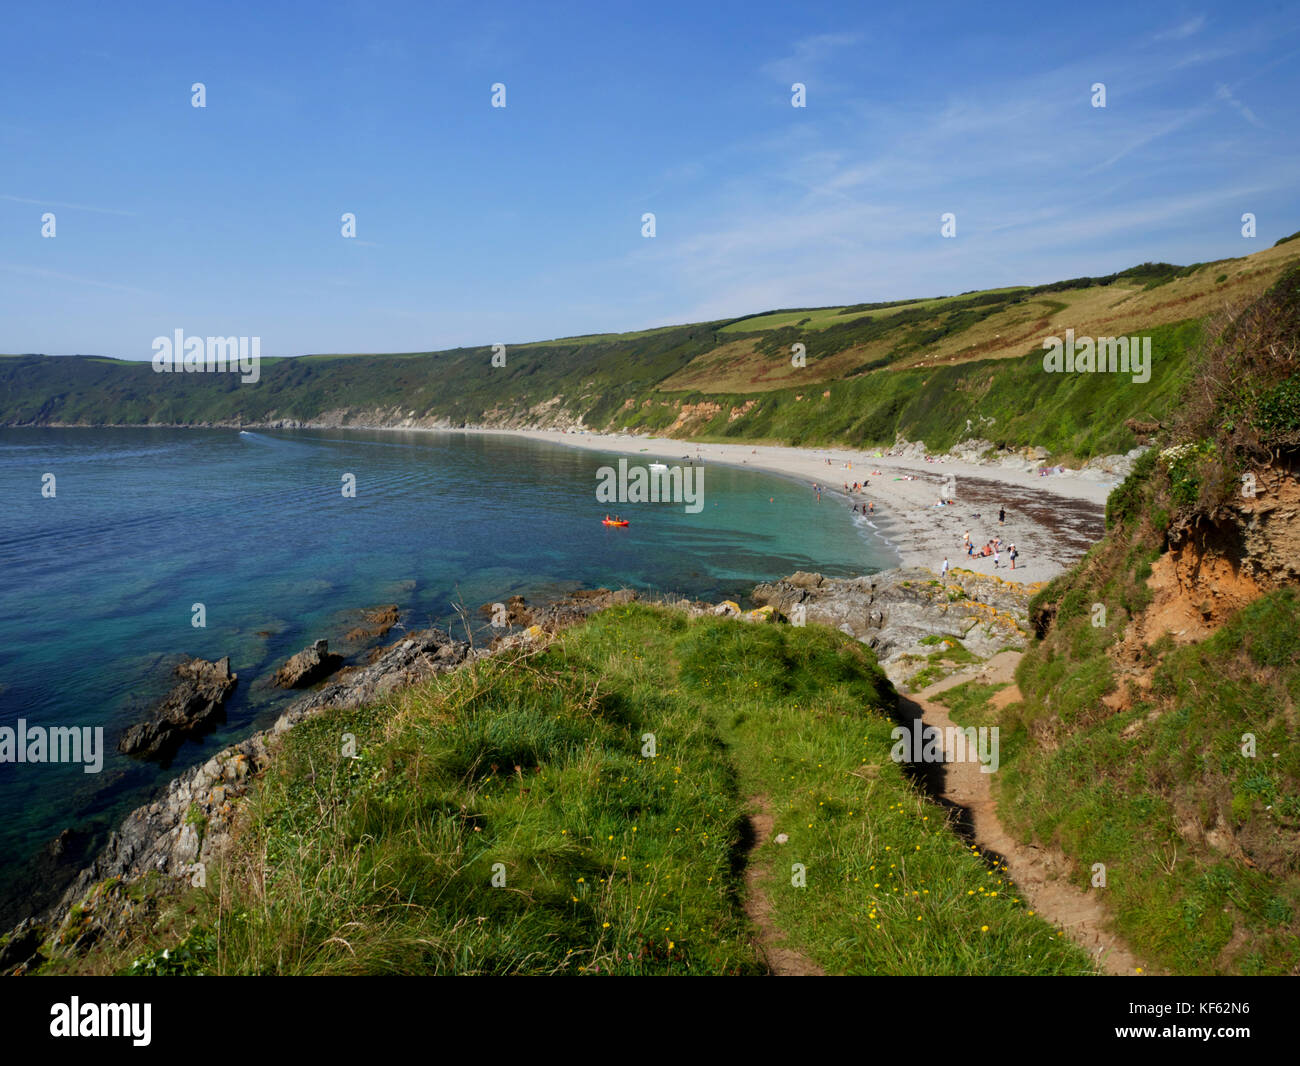 Vault Beach, near Gorran Haven, Cornwall.  Summer.  Served as a location for the film 'About Time' shot in 2012. Stock Photo